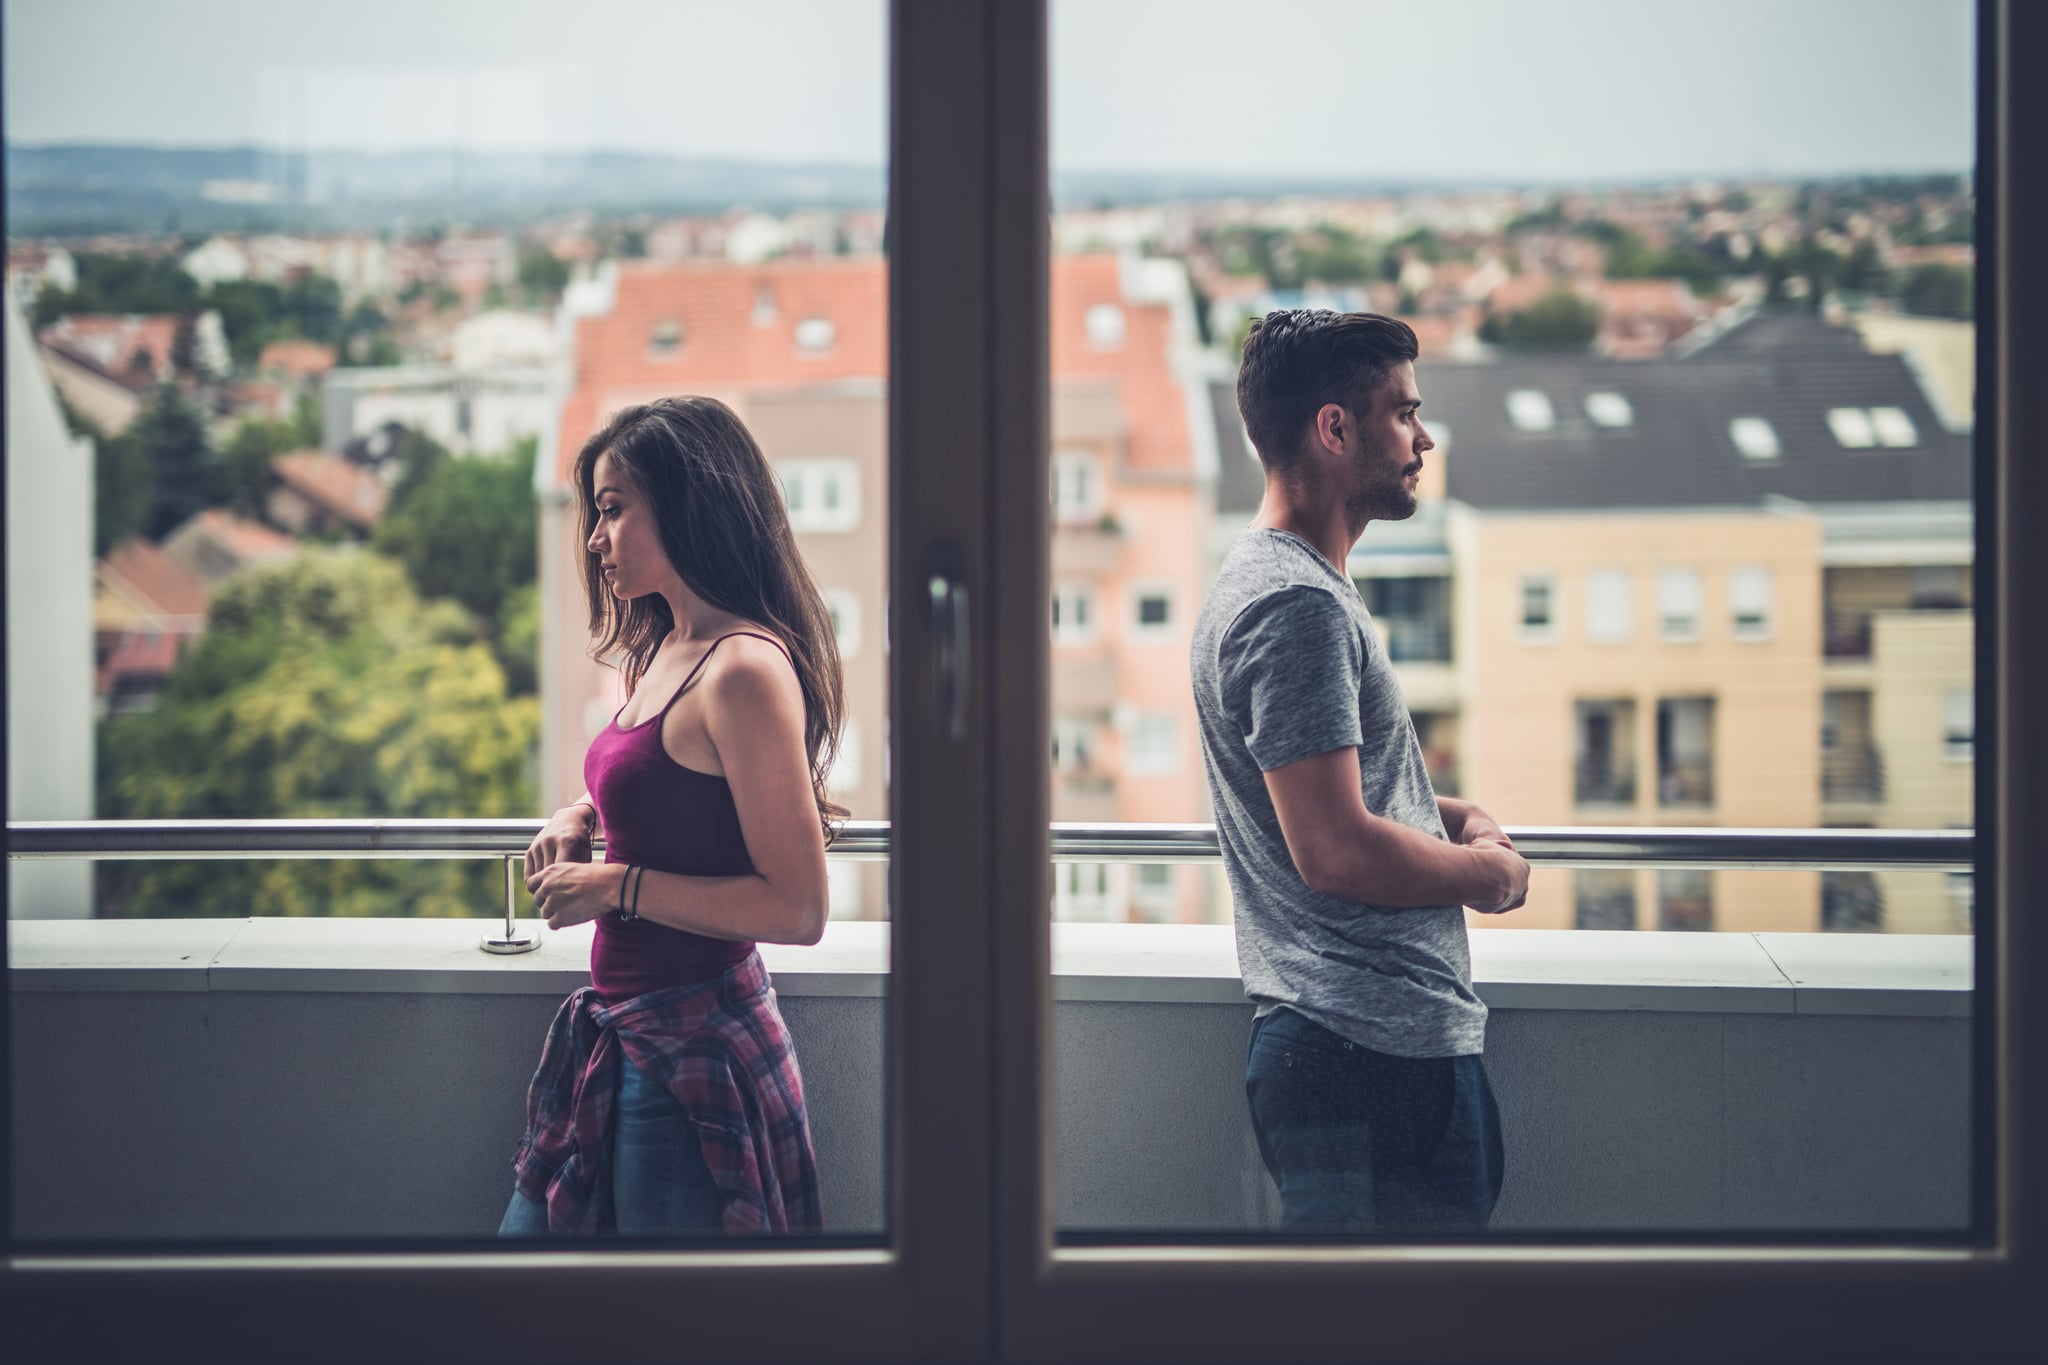 Sad couple standing back to back on a penthouse terrace while having problems in their relationship. The view is through window.